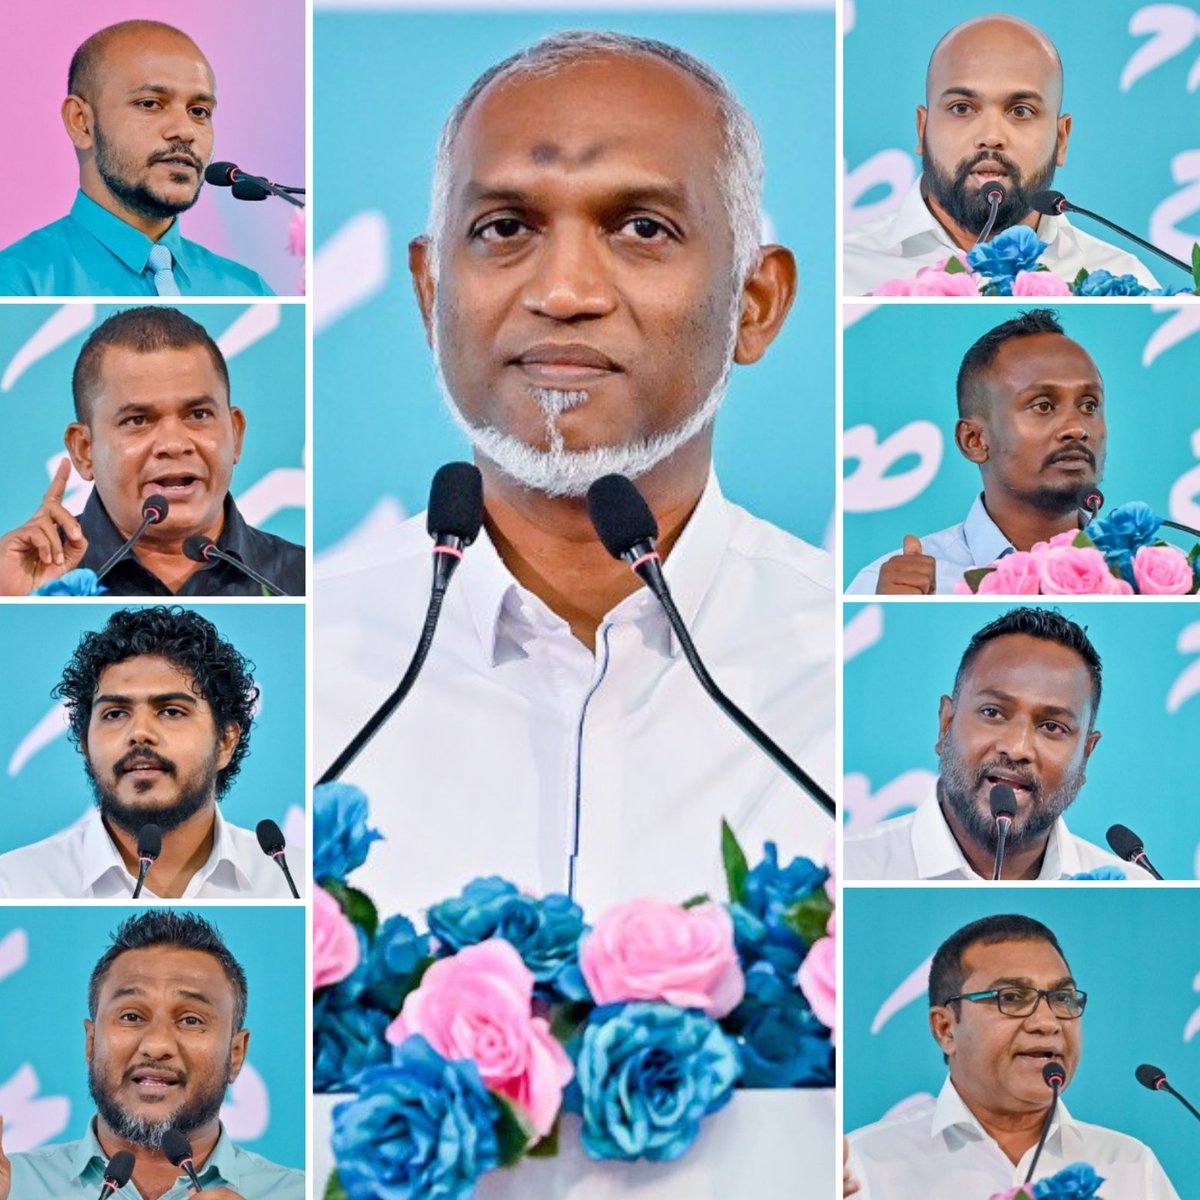 Dream team for Addu City's development. Wish you all the best.